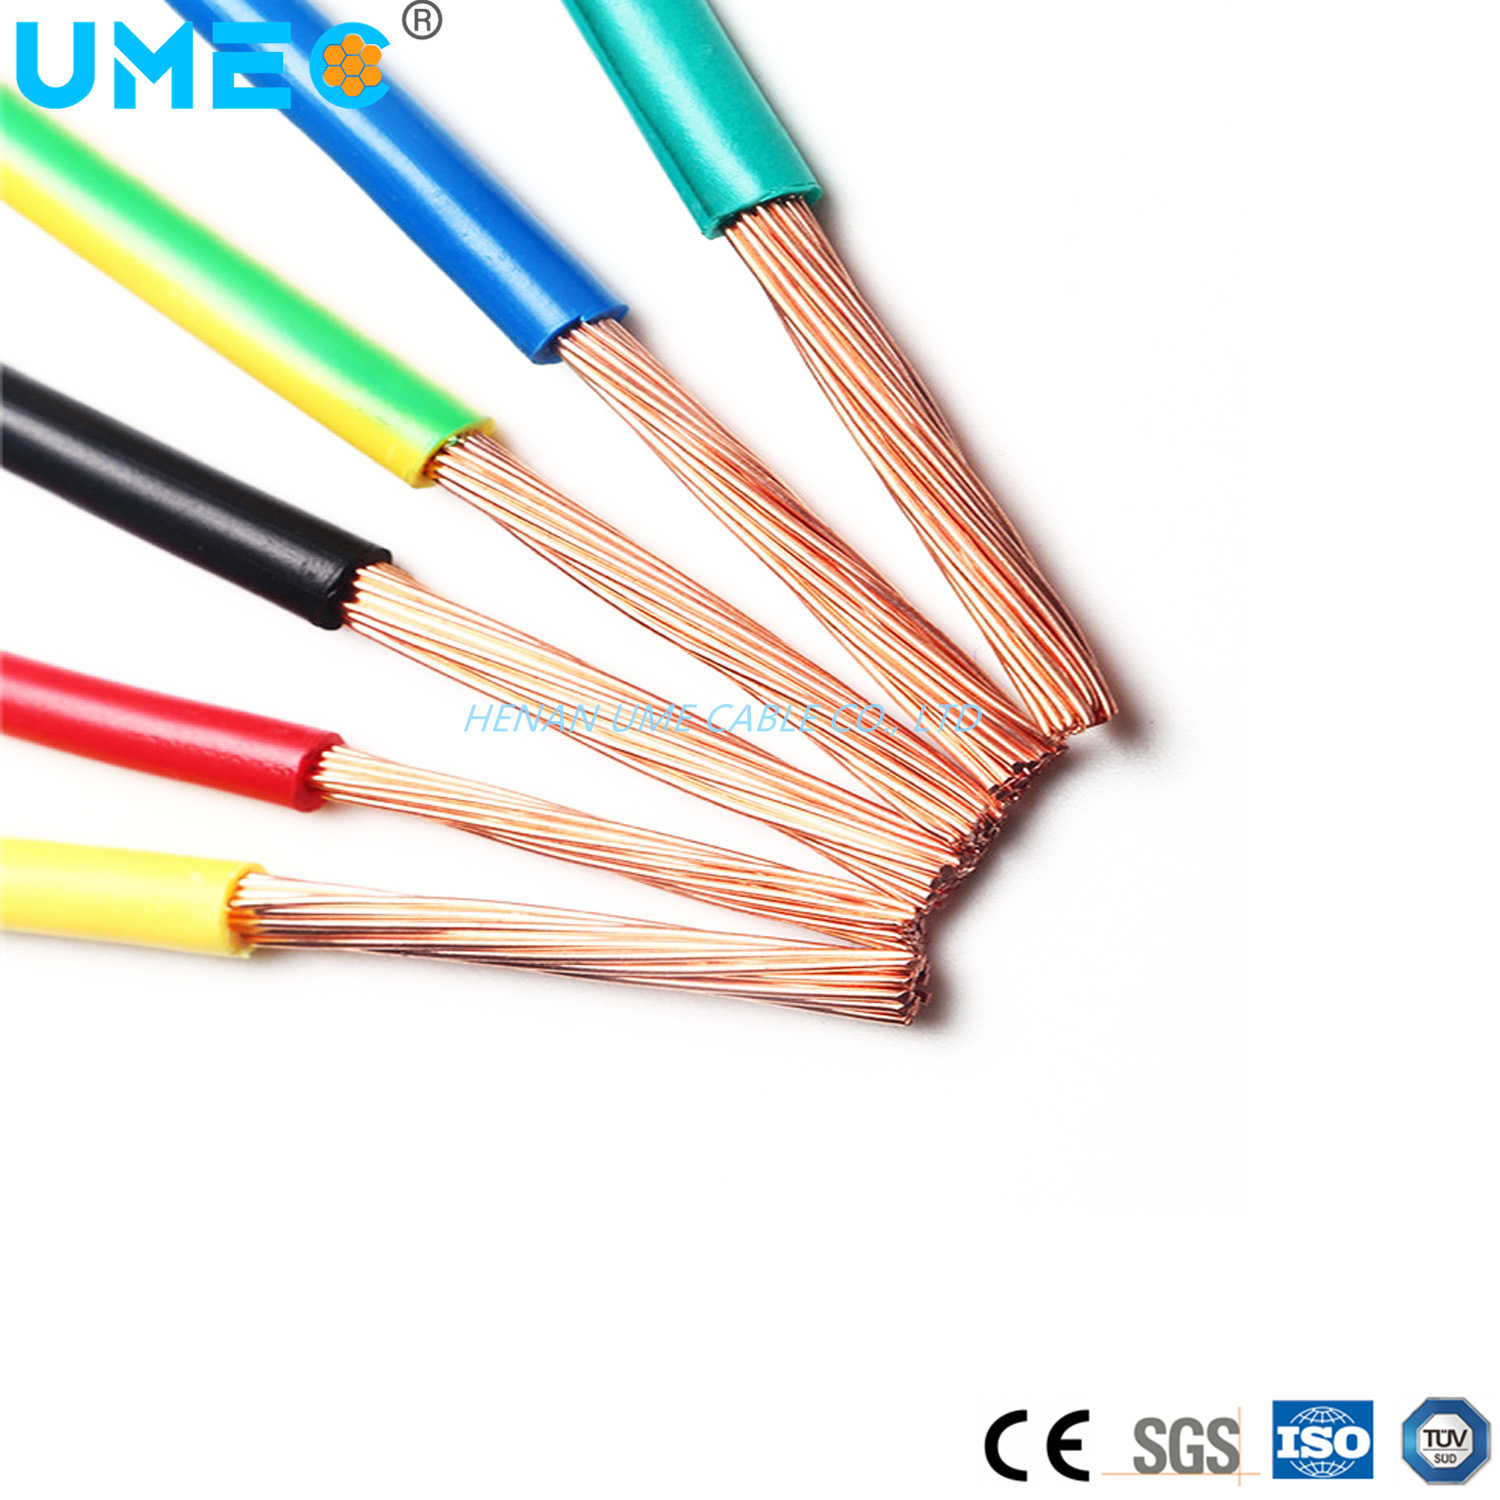 GB5023 Oxygen-Free Copper Conductor Lighting Power Distribution House Wiring 1.5mm 2.5mm 4mm 6mm 10mm Bvr Wire